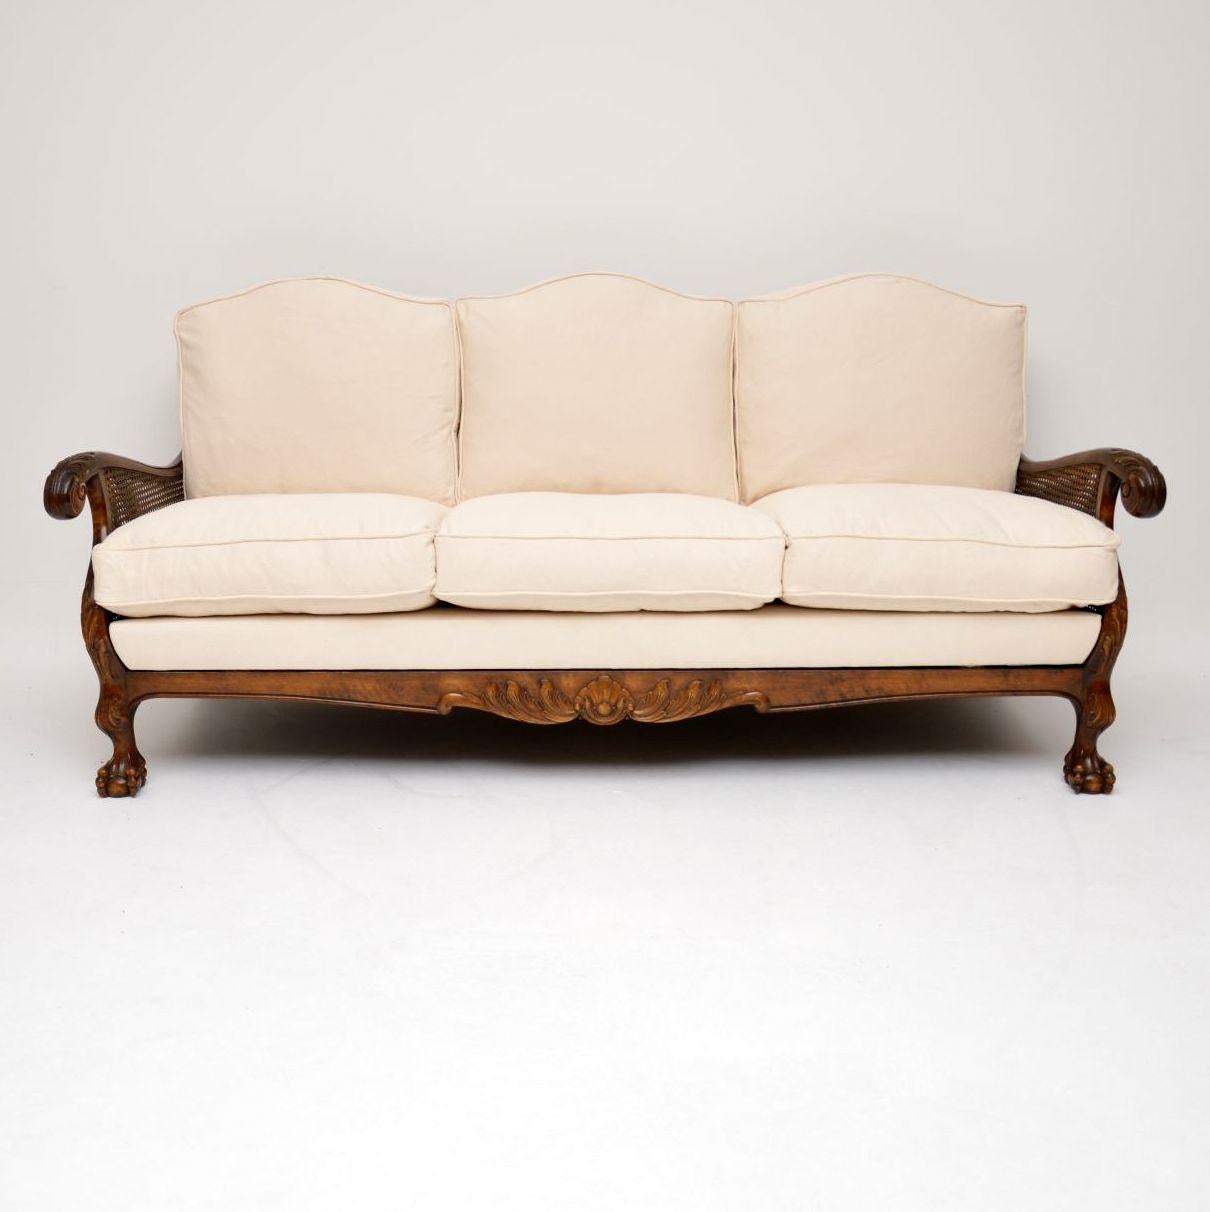 This antique Swedish Bergere three-seat sofa is satin birch and has just been completely re-upholstered in a neutral coloured fabric with new feather cushions. Consequently, it’s very comfortable, because the cushions are generously filled. The